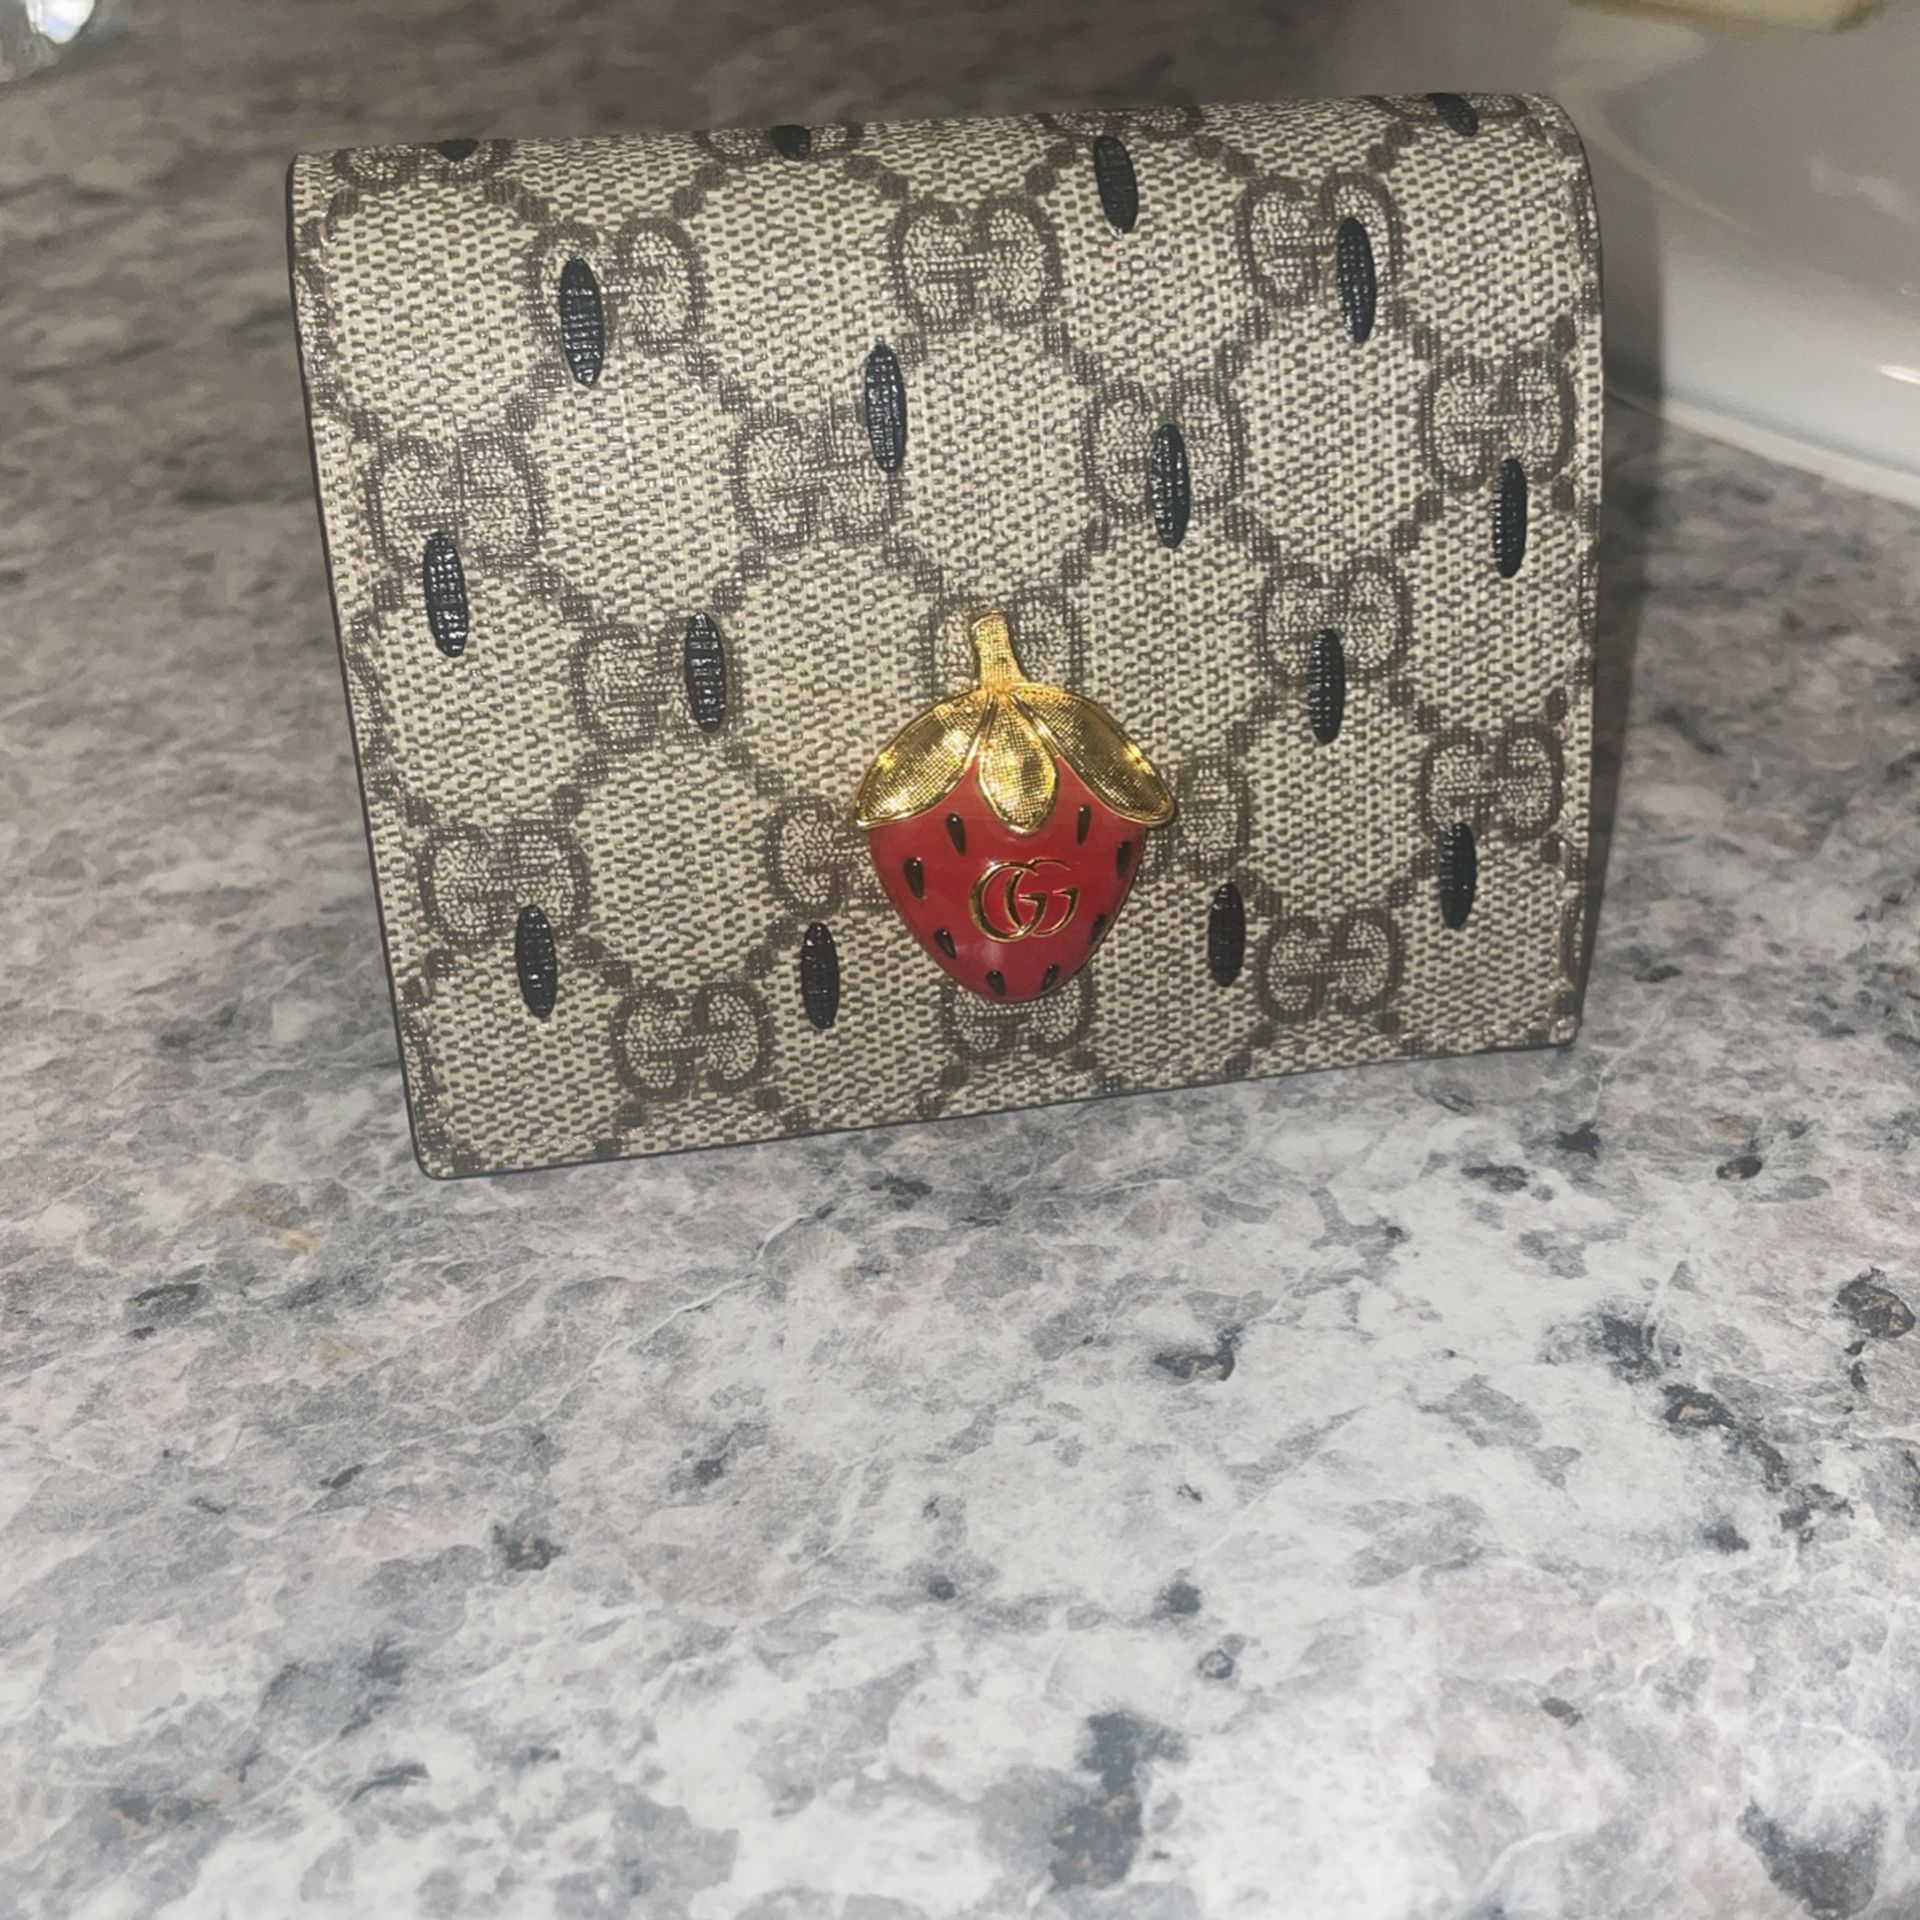 Gucci Coin Purse with Double G Strawberry